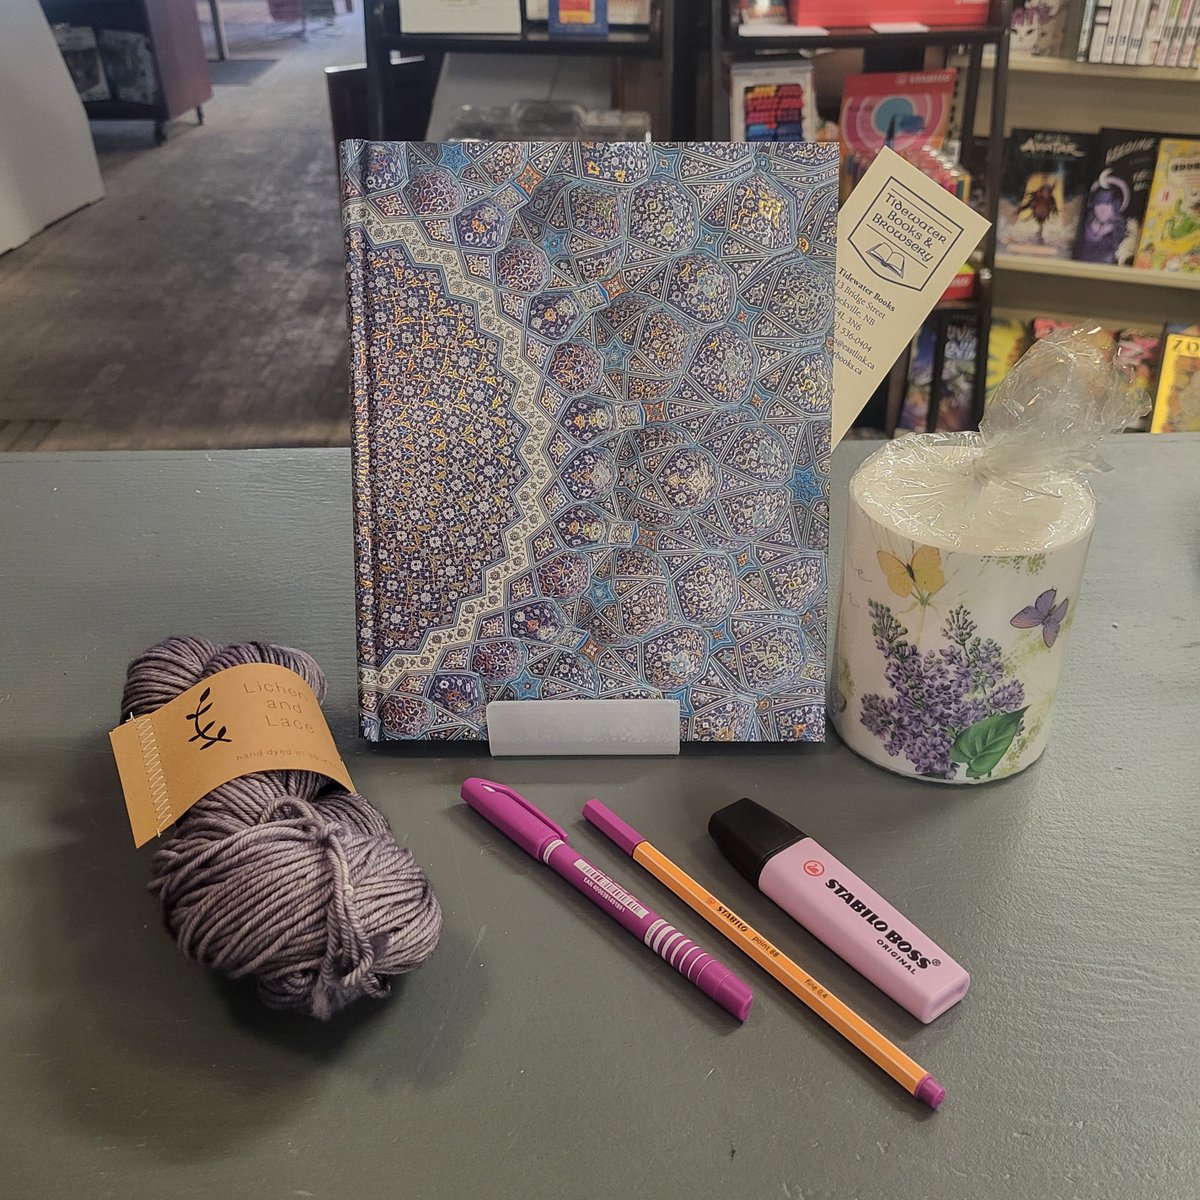 A little lilac to perk up your day! 💕🇨🇦📚💜

Lovely Lichen and Lace Hand Dyed Yarn, Fiona Lilac candle, gorgeous notebook, & positively purplely pens & highlighters!

Visit us in person or online at tidewaterbooks.ca! 💕🇨🇦📚

#ShopSmall #ShopLocal #IndieBookstores